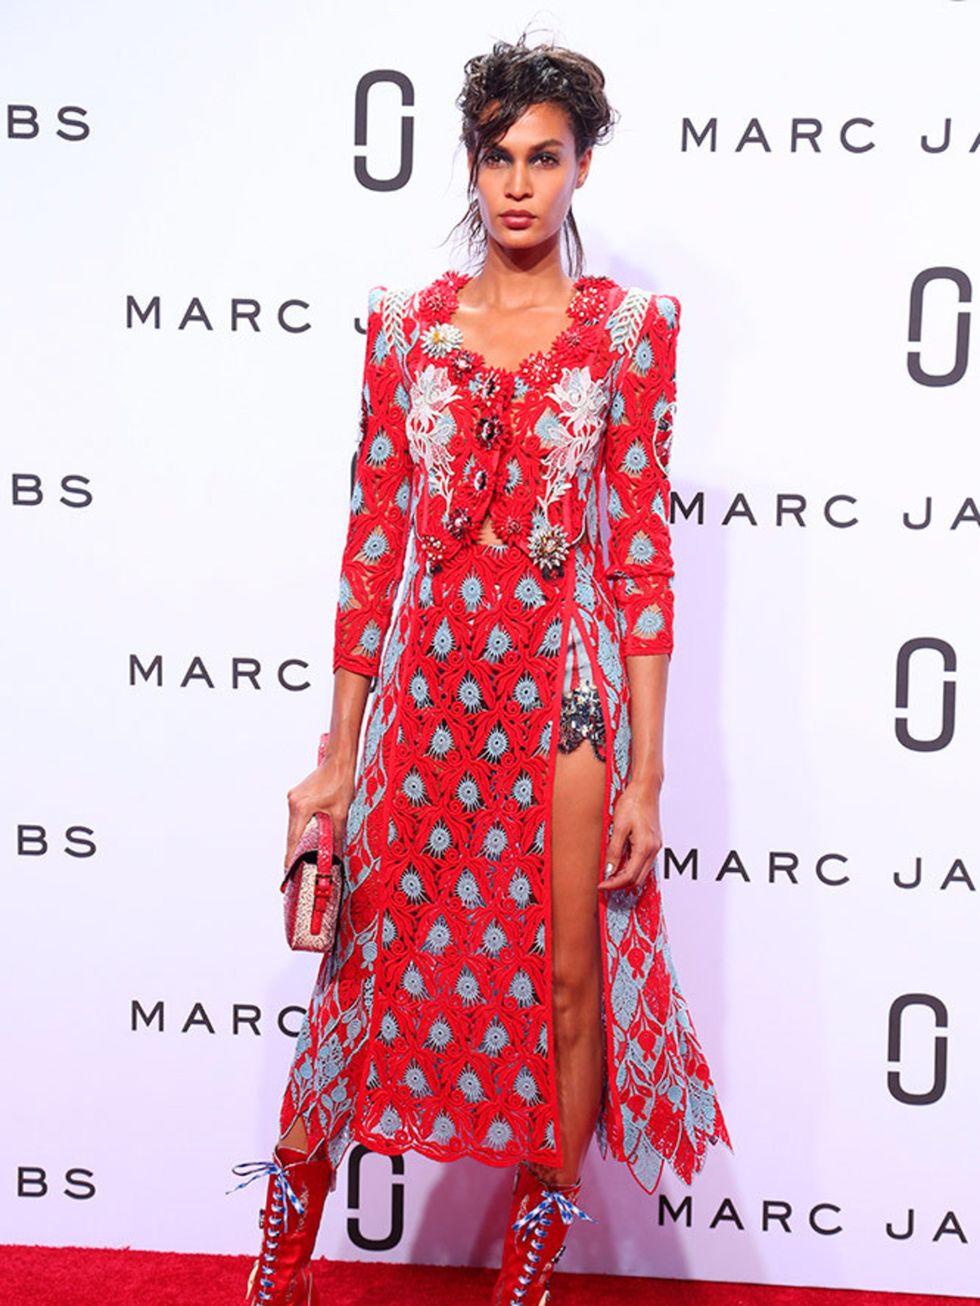 Joan Smalls on the catwalk at the Marc Jacobs s/s 16 show.